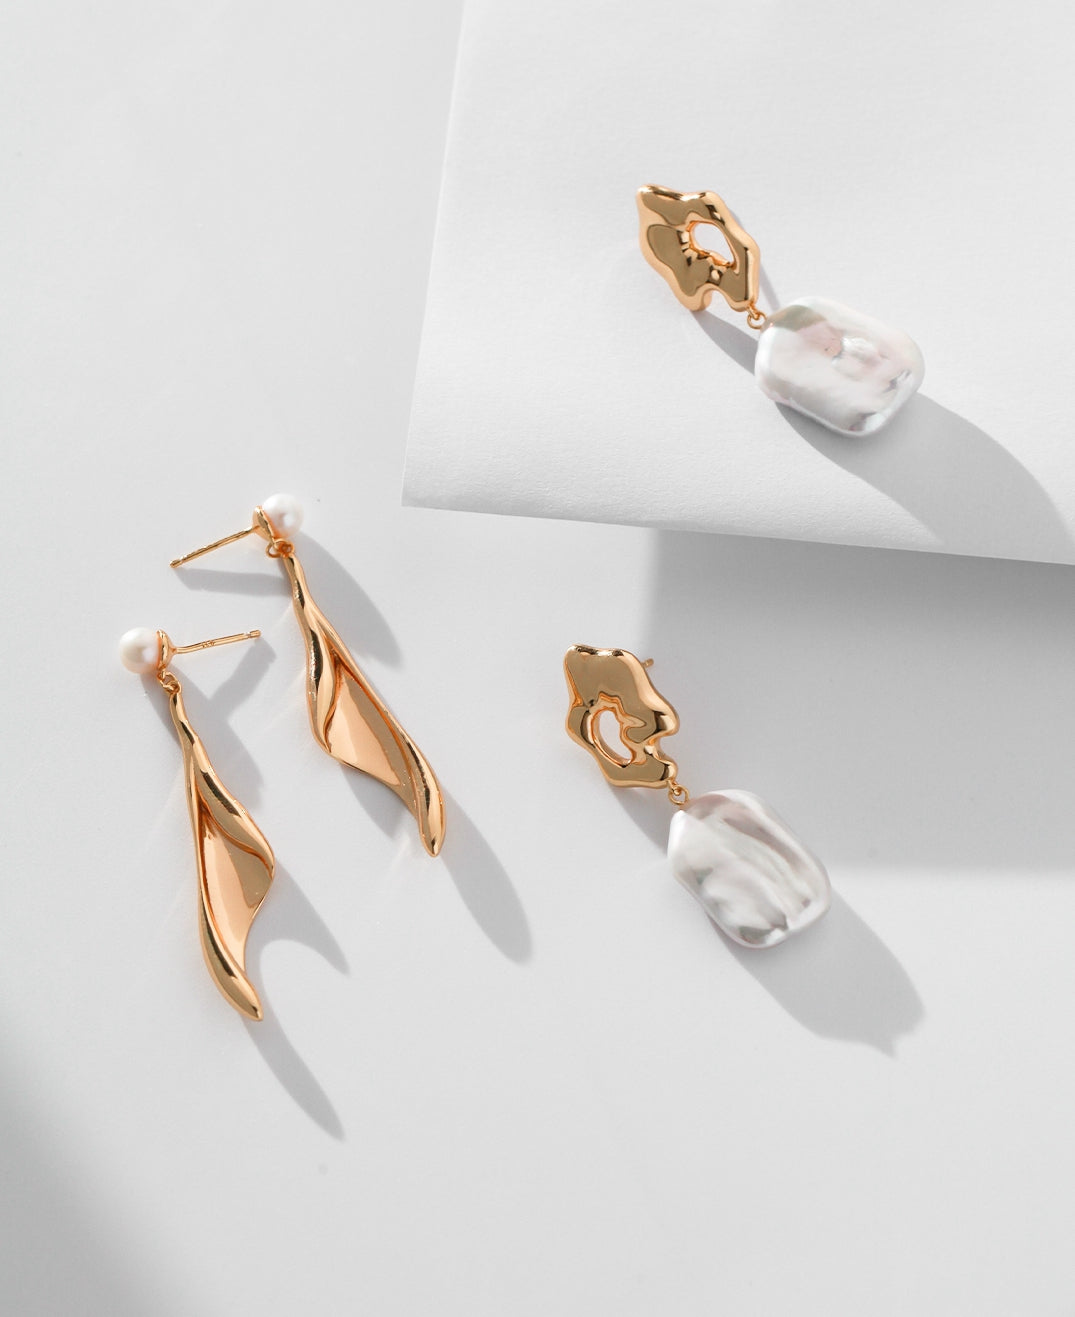 Elegant Sterling Silver Baroque Pearl Earrings: A Fusion of Artistry and Rarity